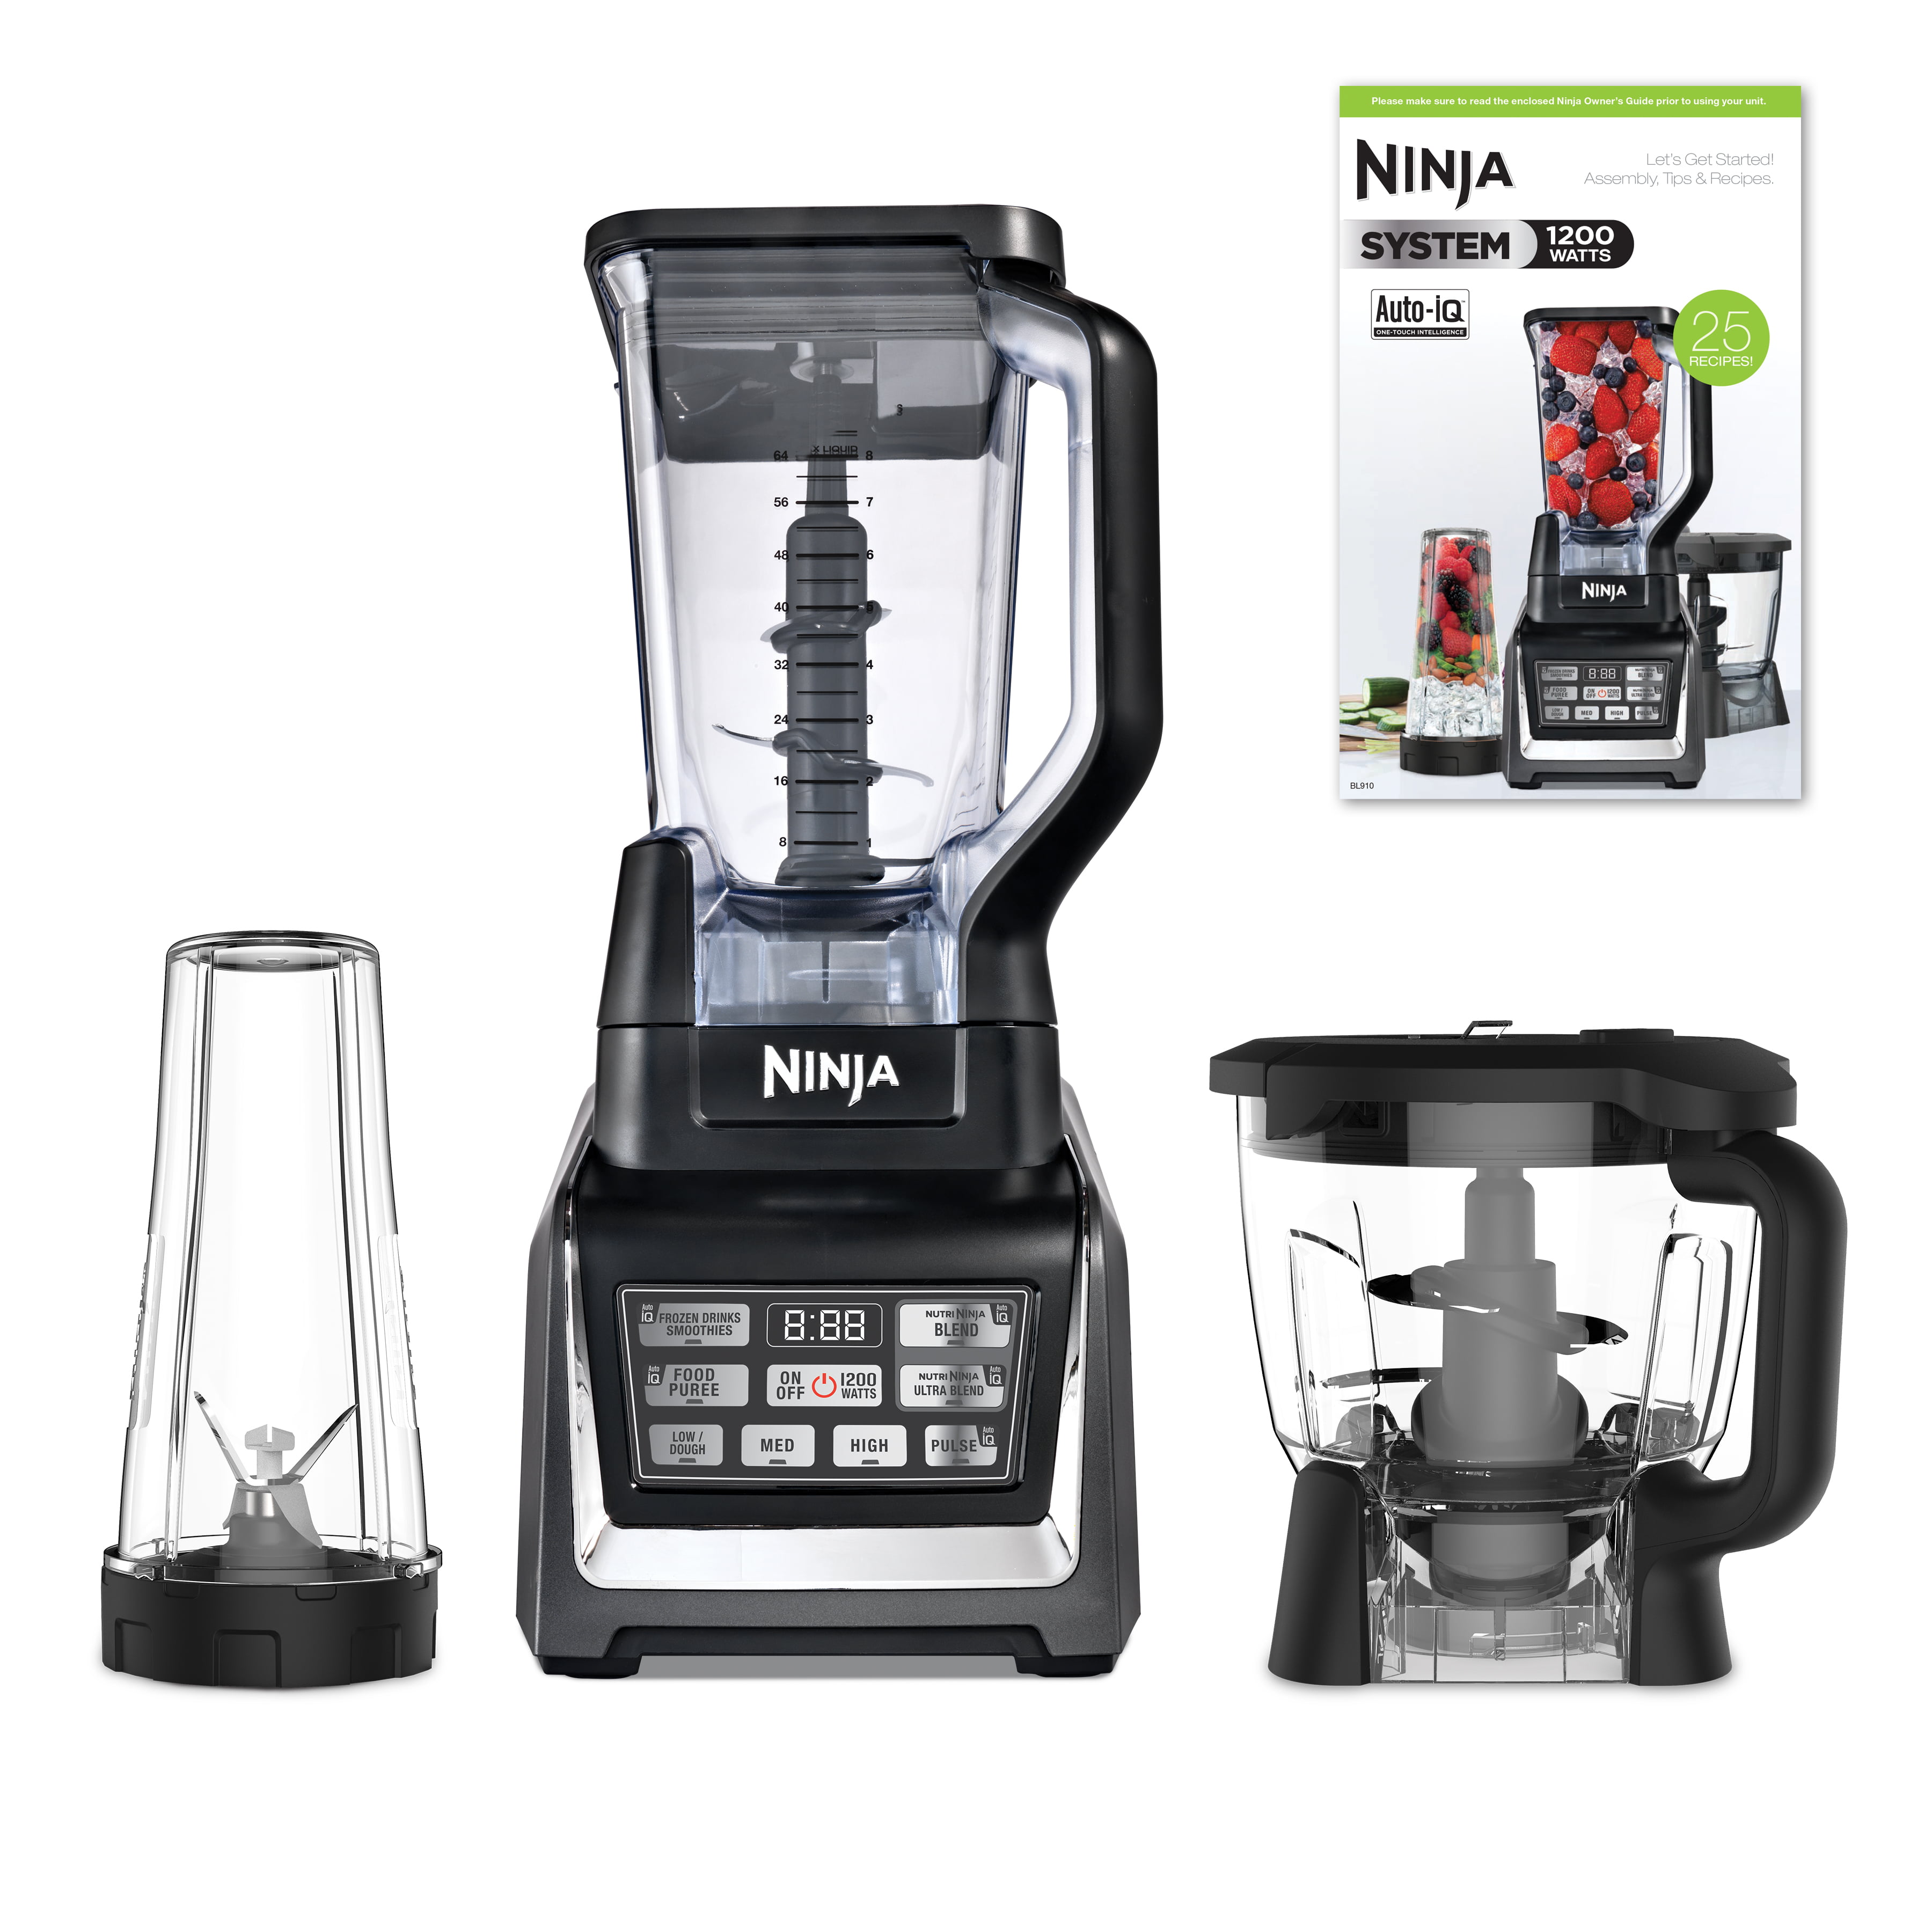 This Ninja Compact Kitchen System is a3-in-1 appliance that's $50 off 'til  midnight